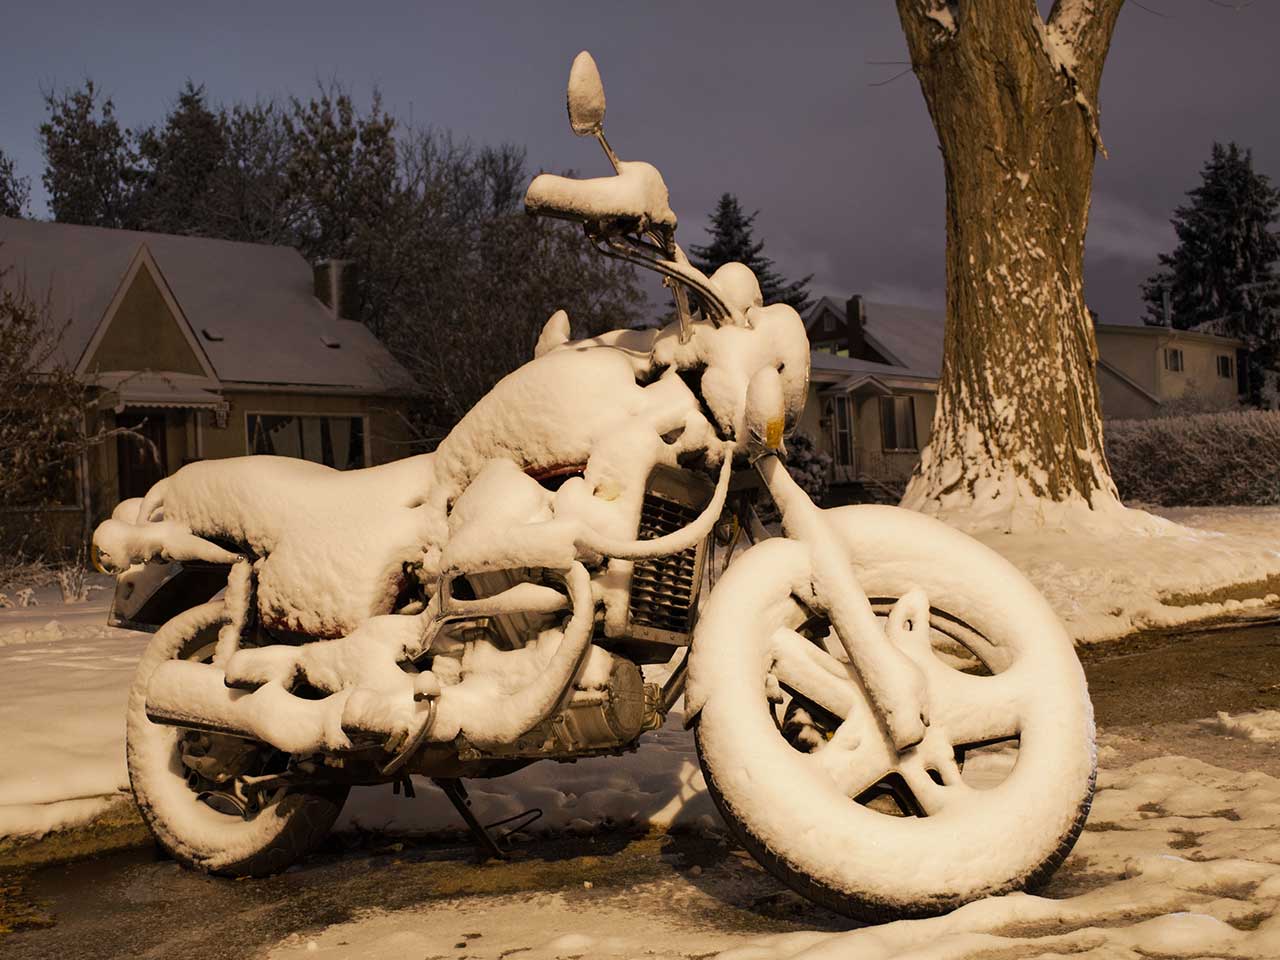 Motorbike covered in snow during the Winter